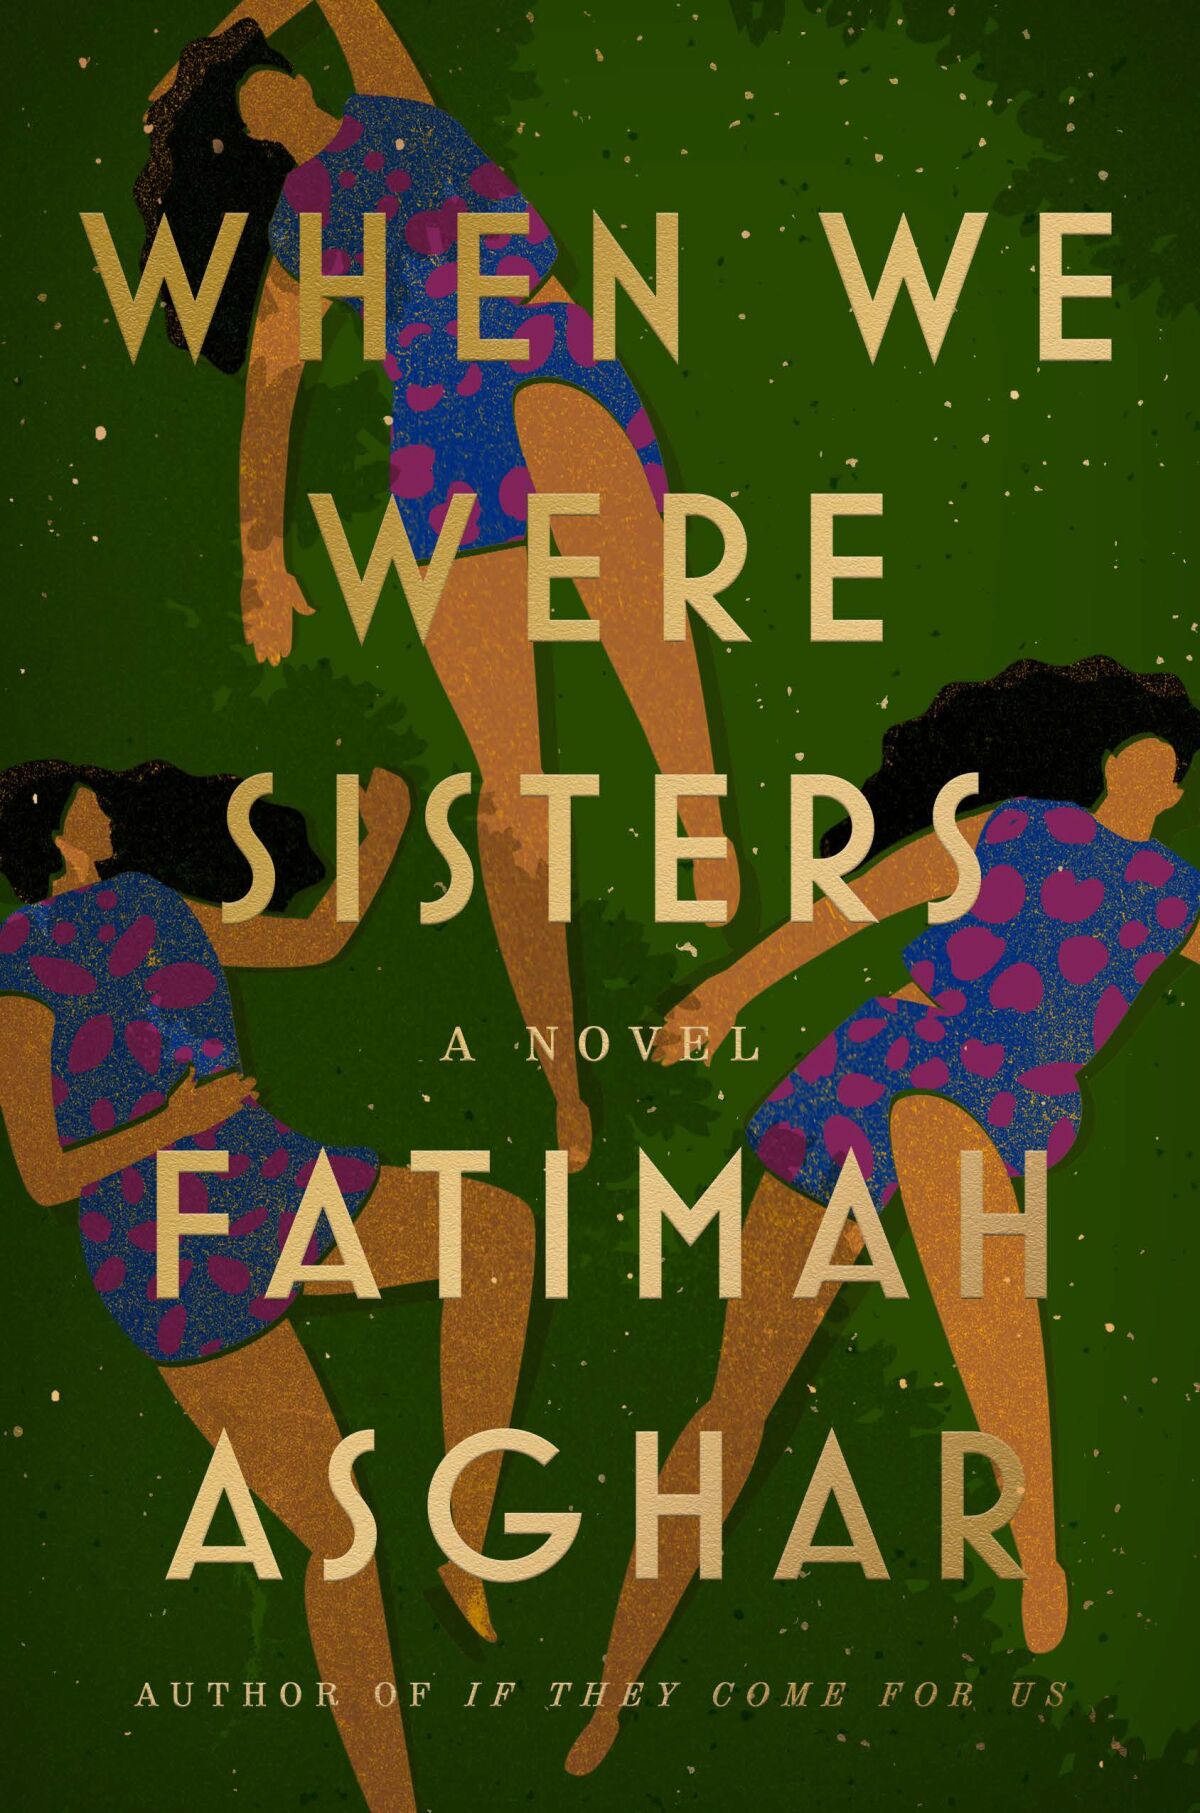 Book cover for "When We Were Sisters" by Fatimah Asghar